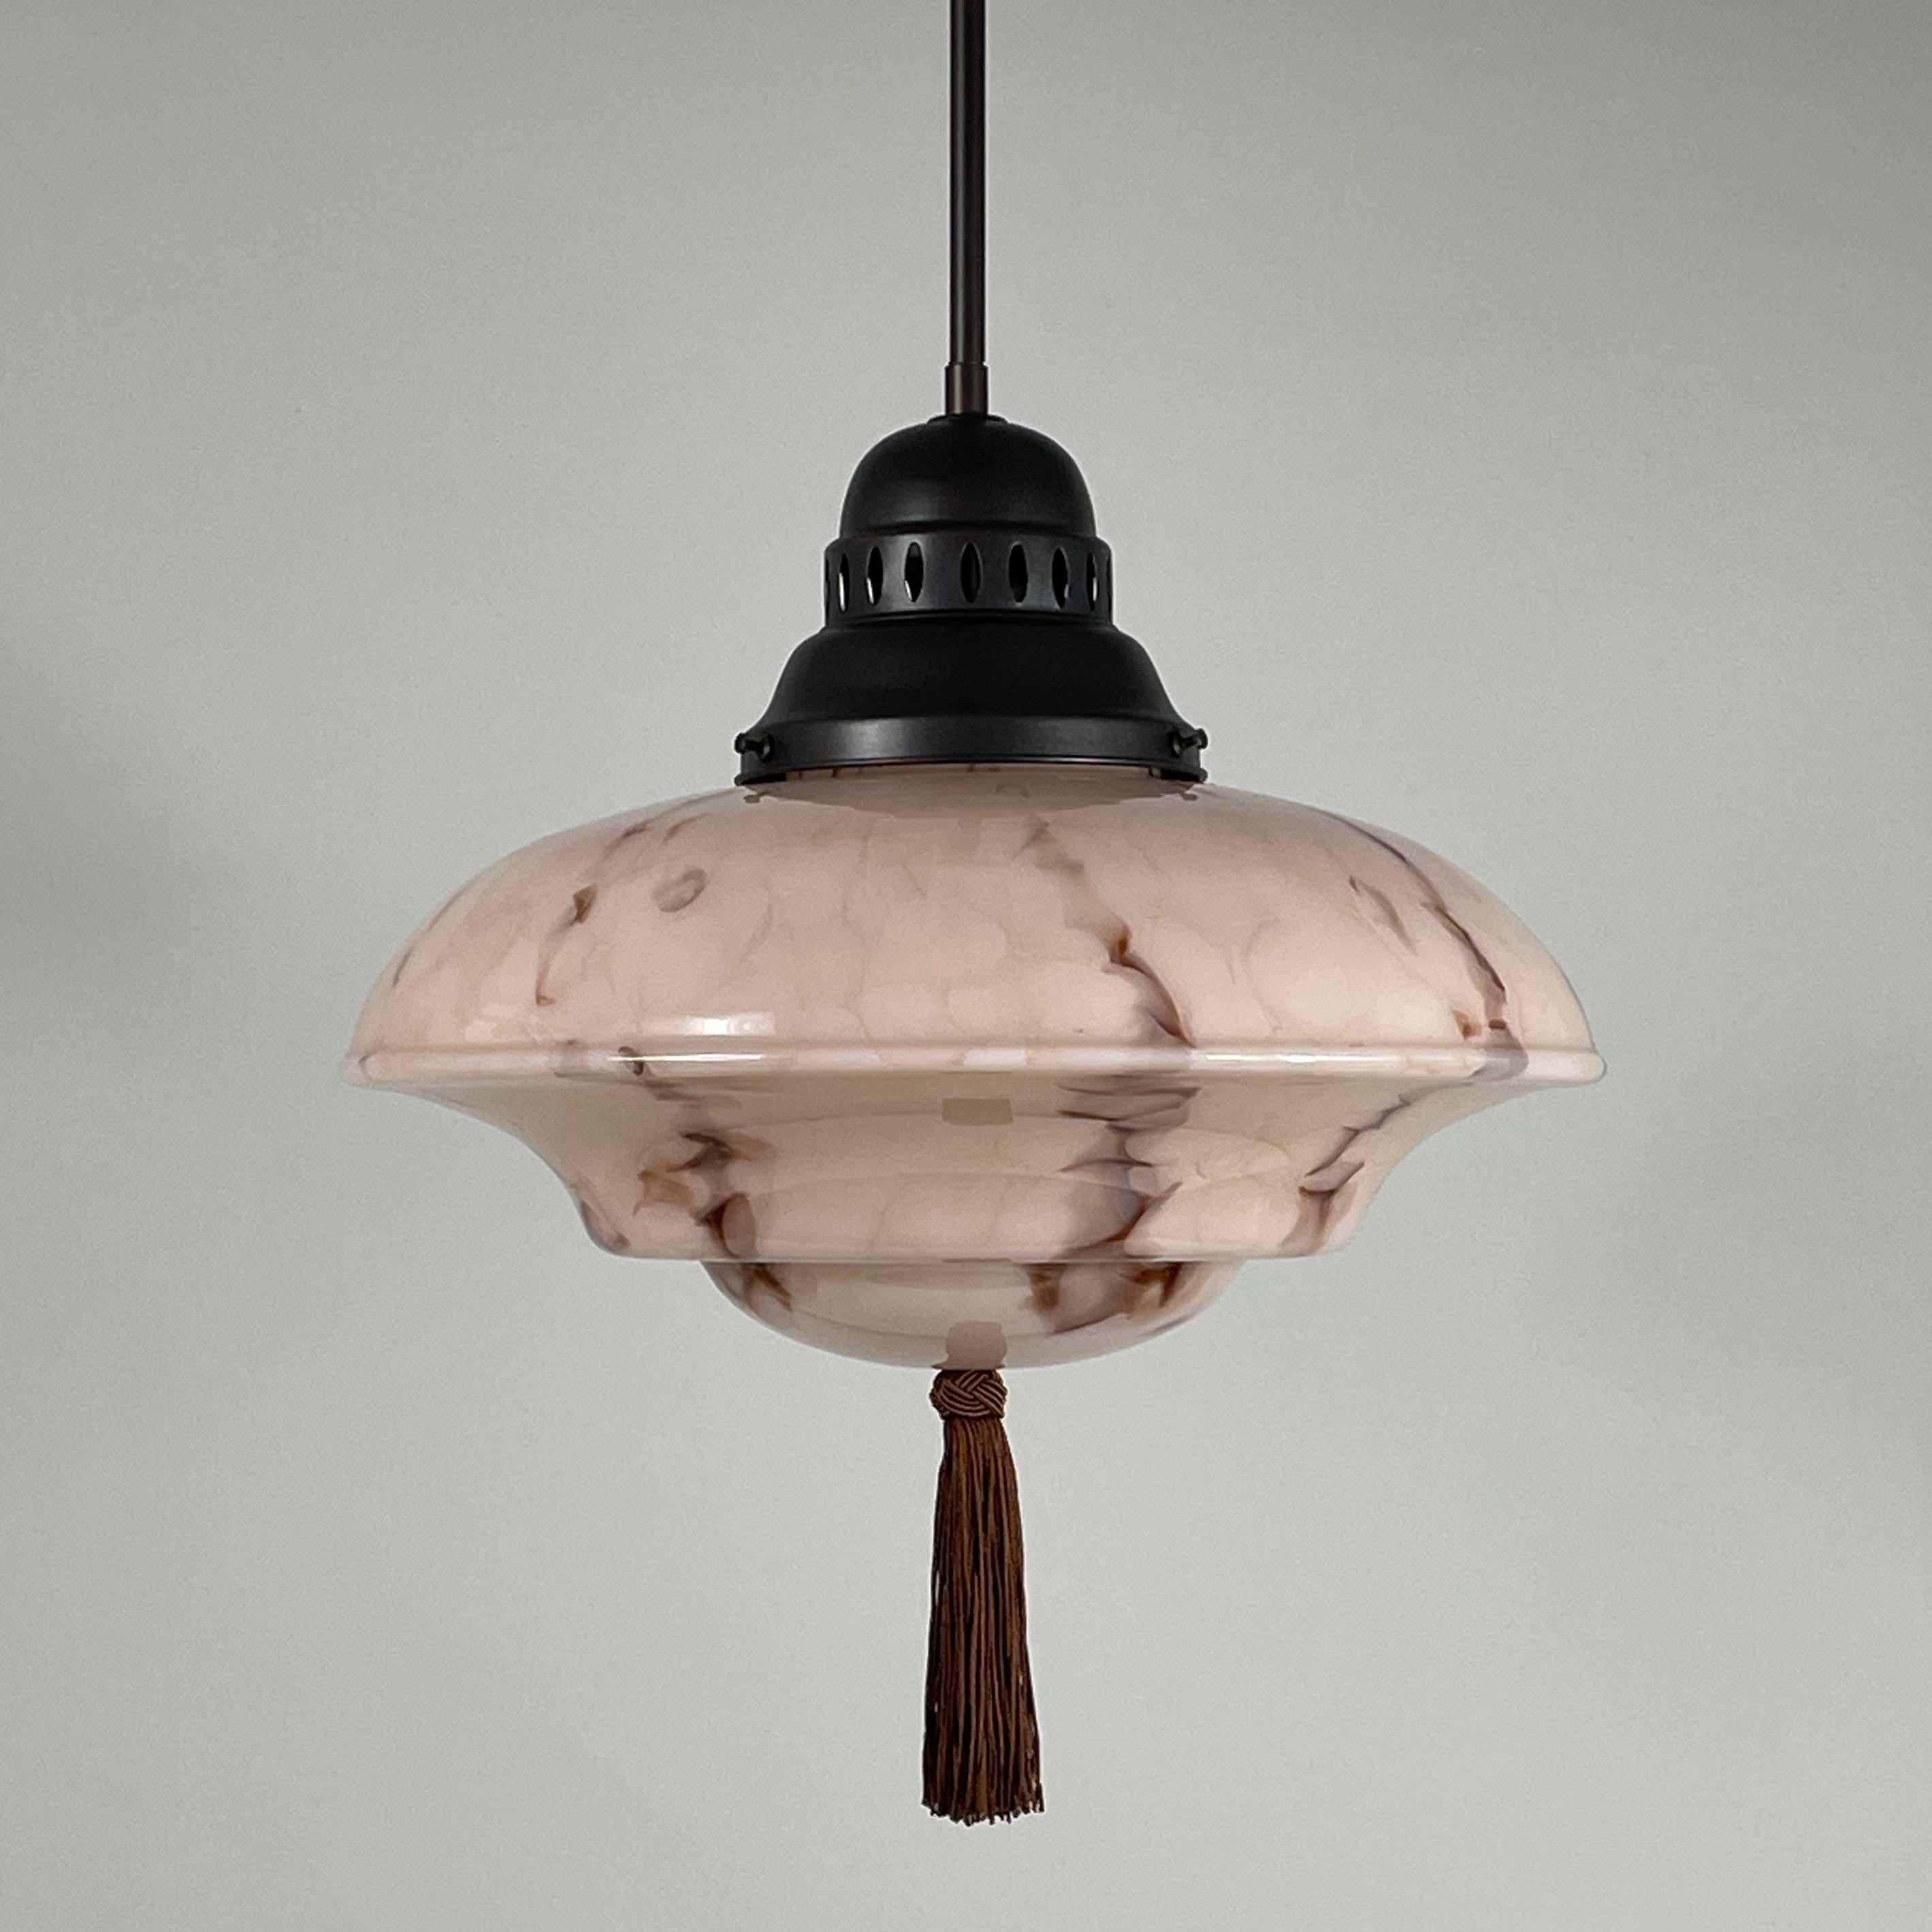 This elegant pendant was designed and manufactured in Germany during the Bauhaus Period in the 1920s to 1930s.

It features a pale rose colored opaline glass lampshade with brown and beige marbled decor, bronzed / burnished metal hardware and dark